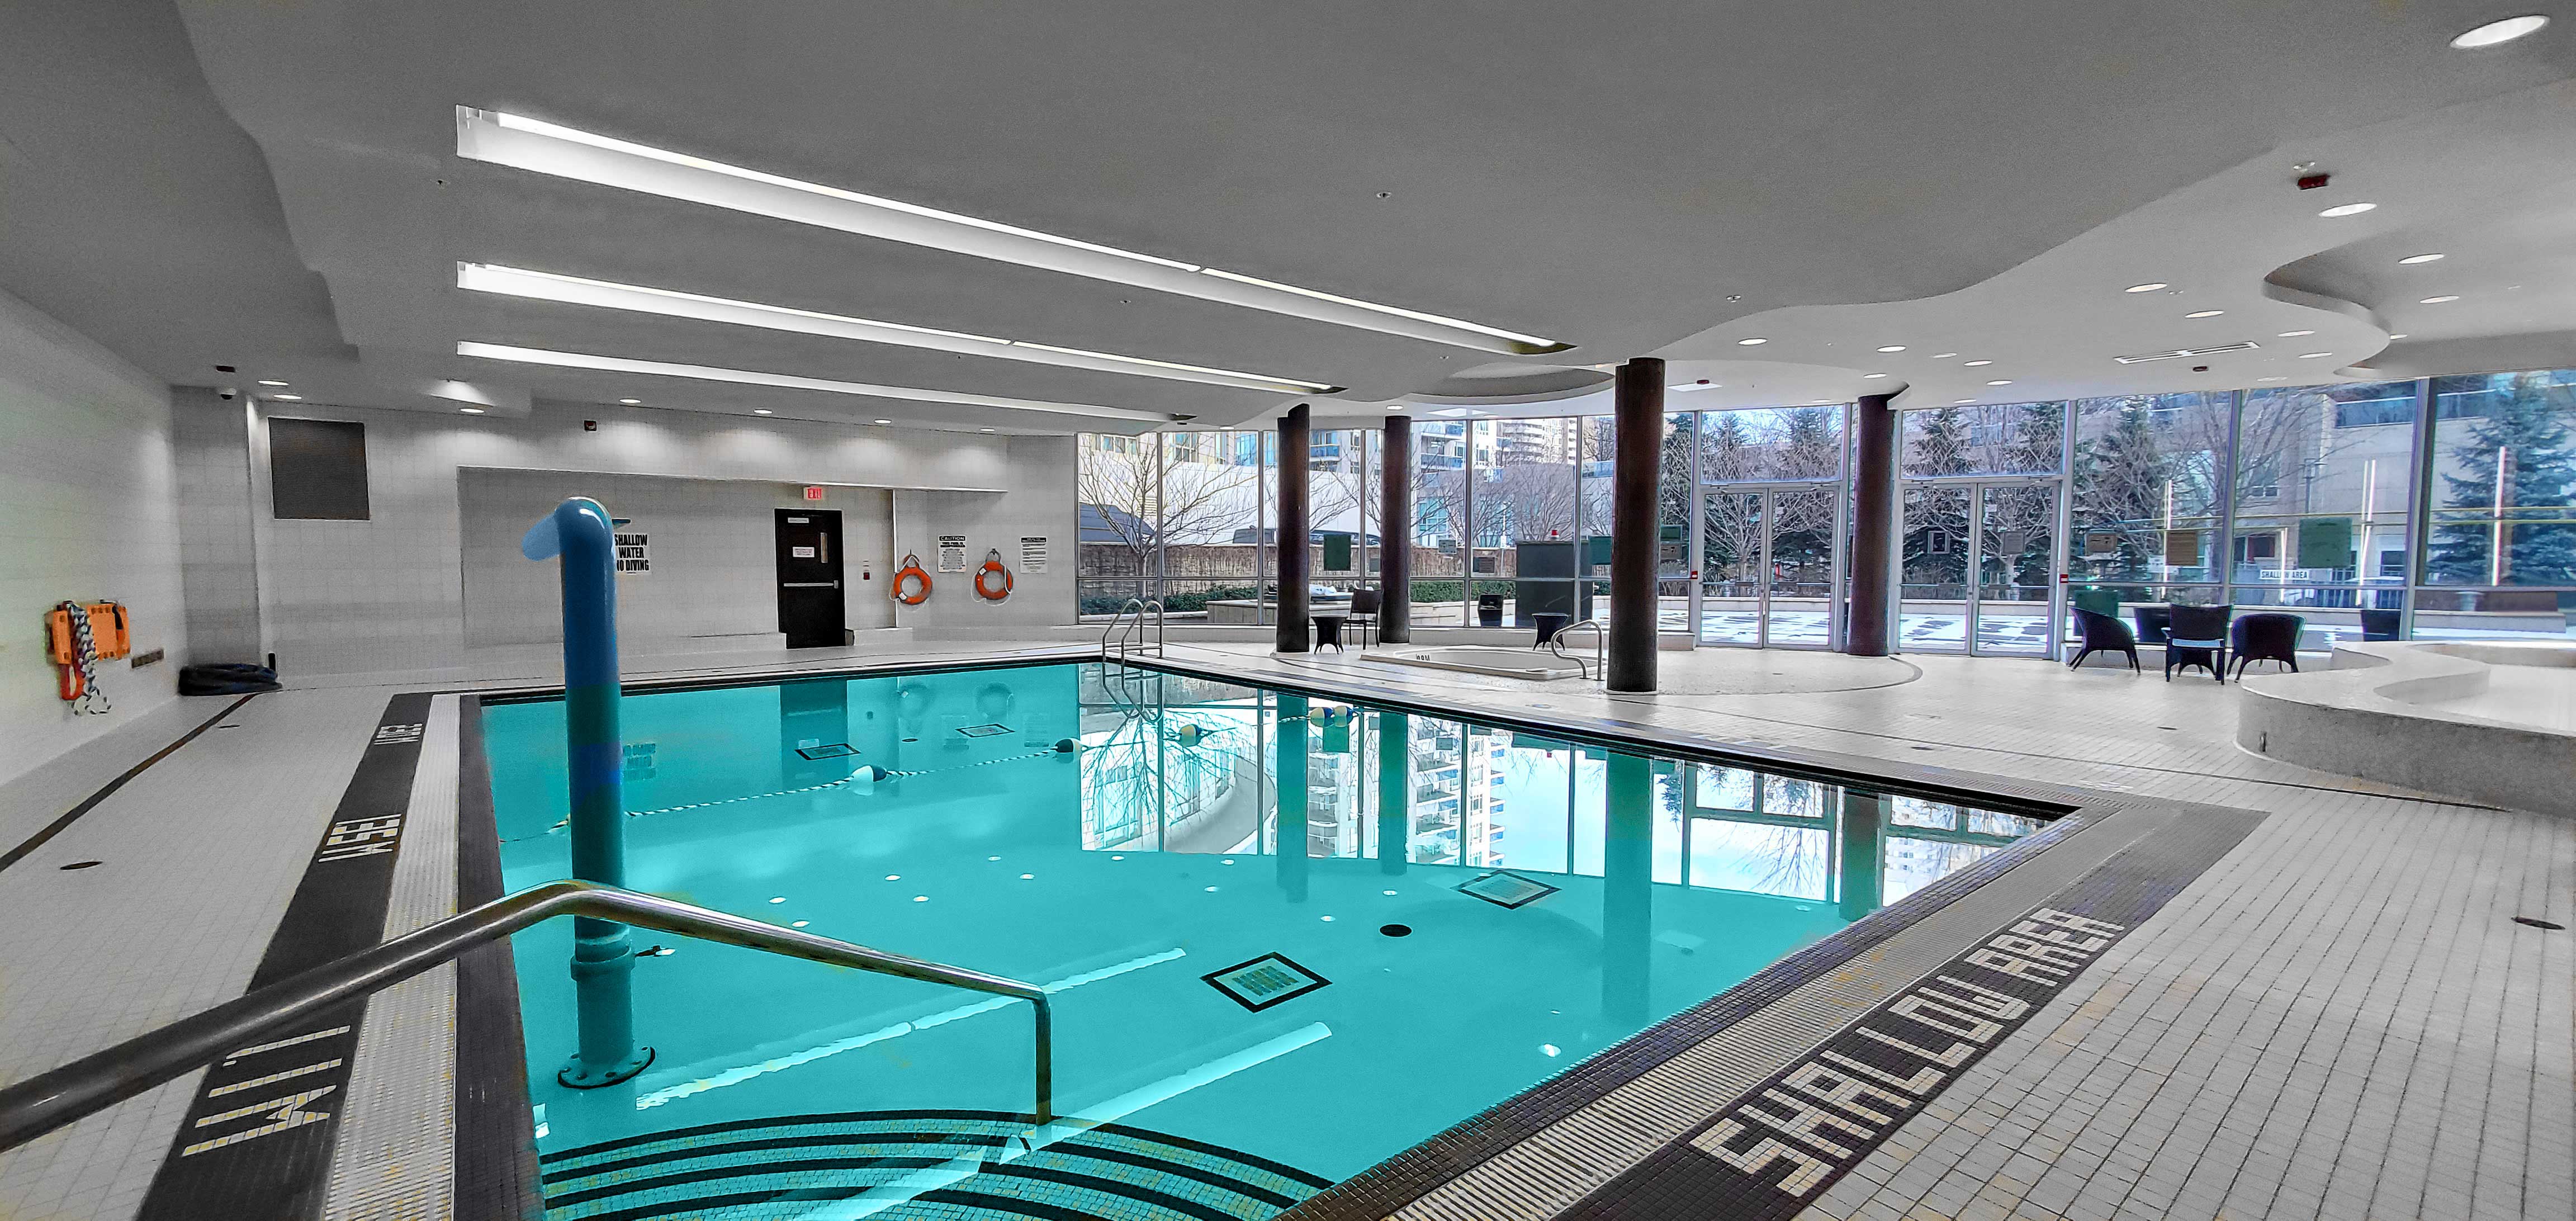 Image of the indoor pool